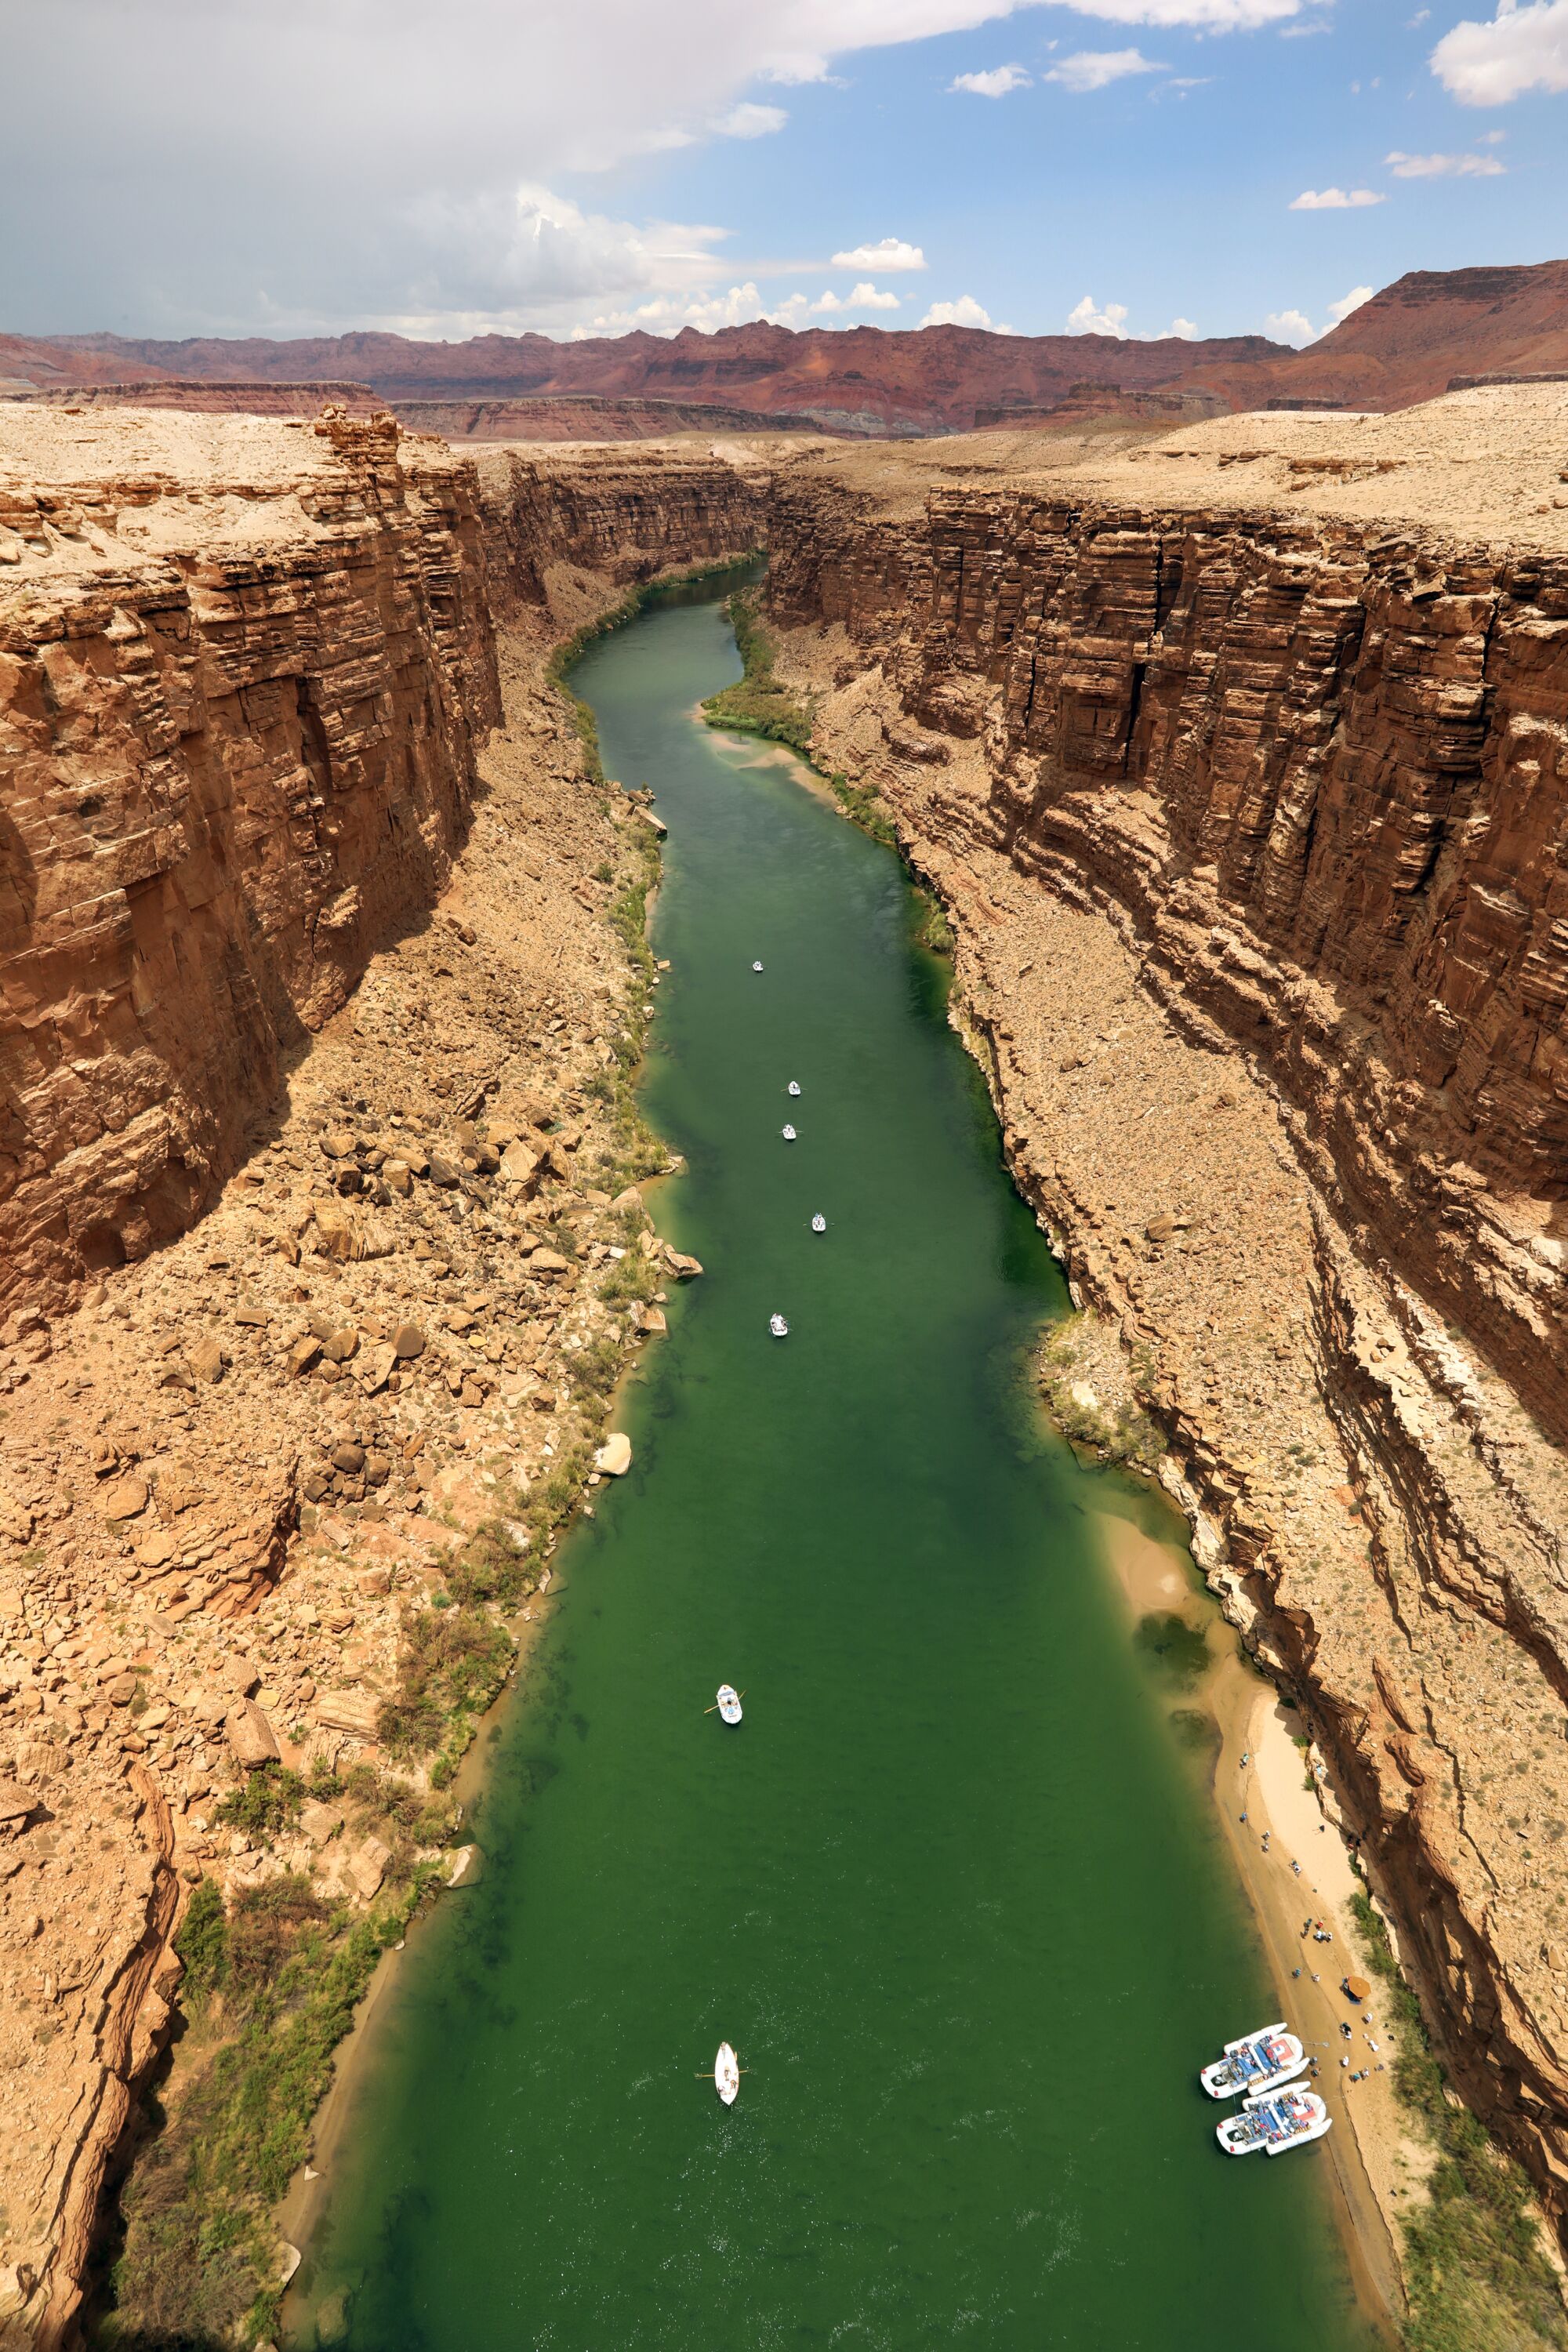 Rafters float down a river as seen between a canyon from above